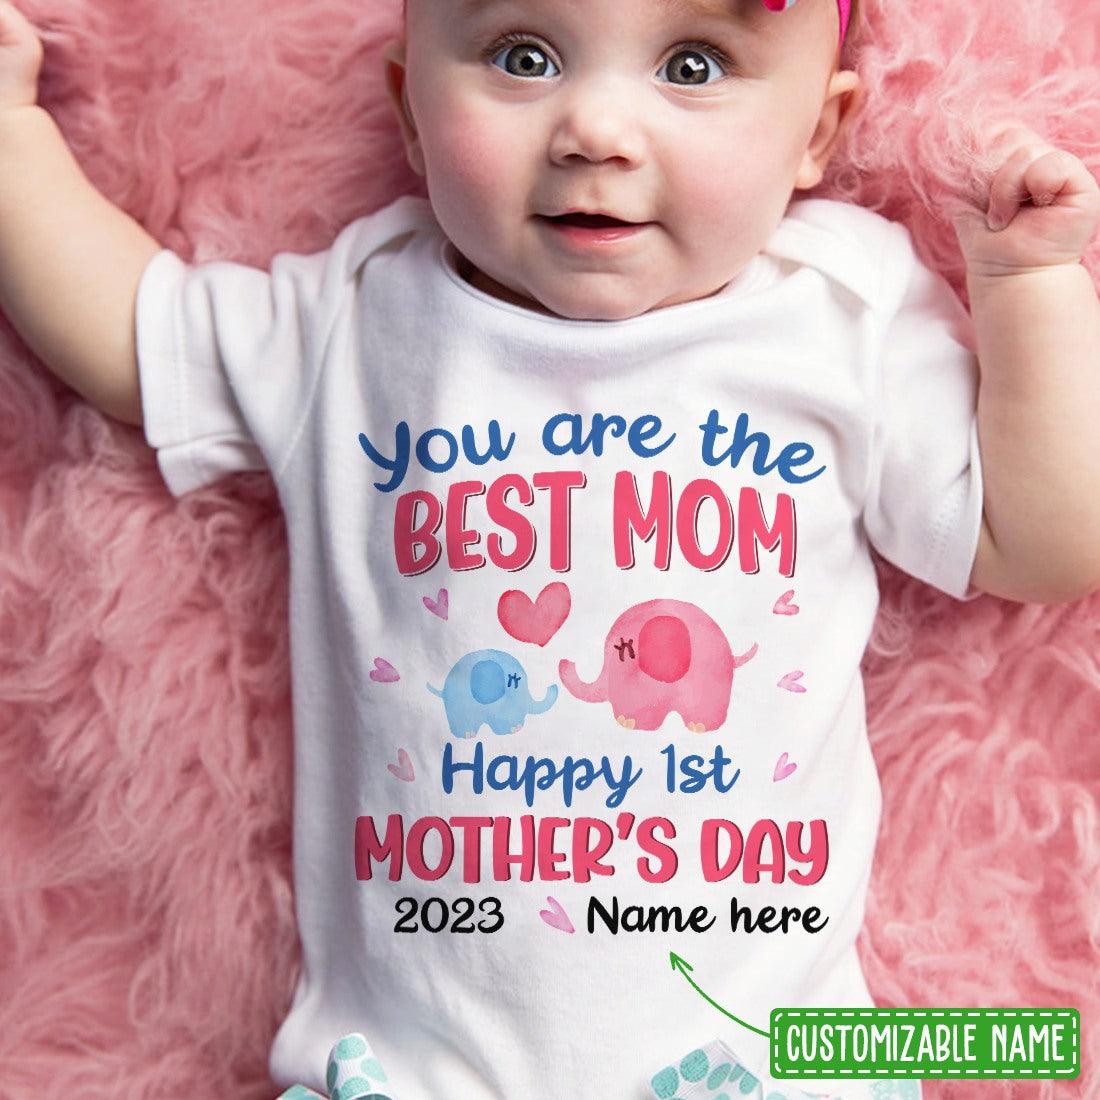 Happy 1st Mother's Day Baby Onesies - You Are The Best Mom Cute Baby Bodysuit Onesies, Personalized Newborn Onesies - Amzanimalsgift